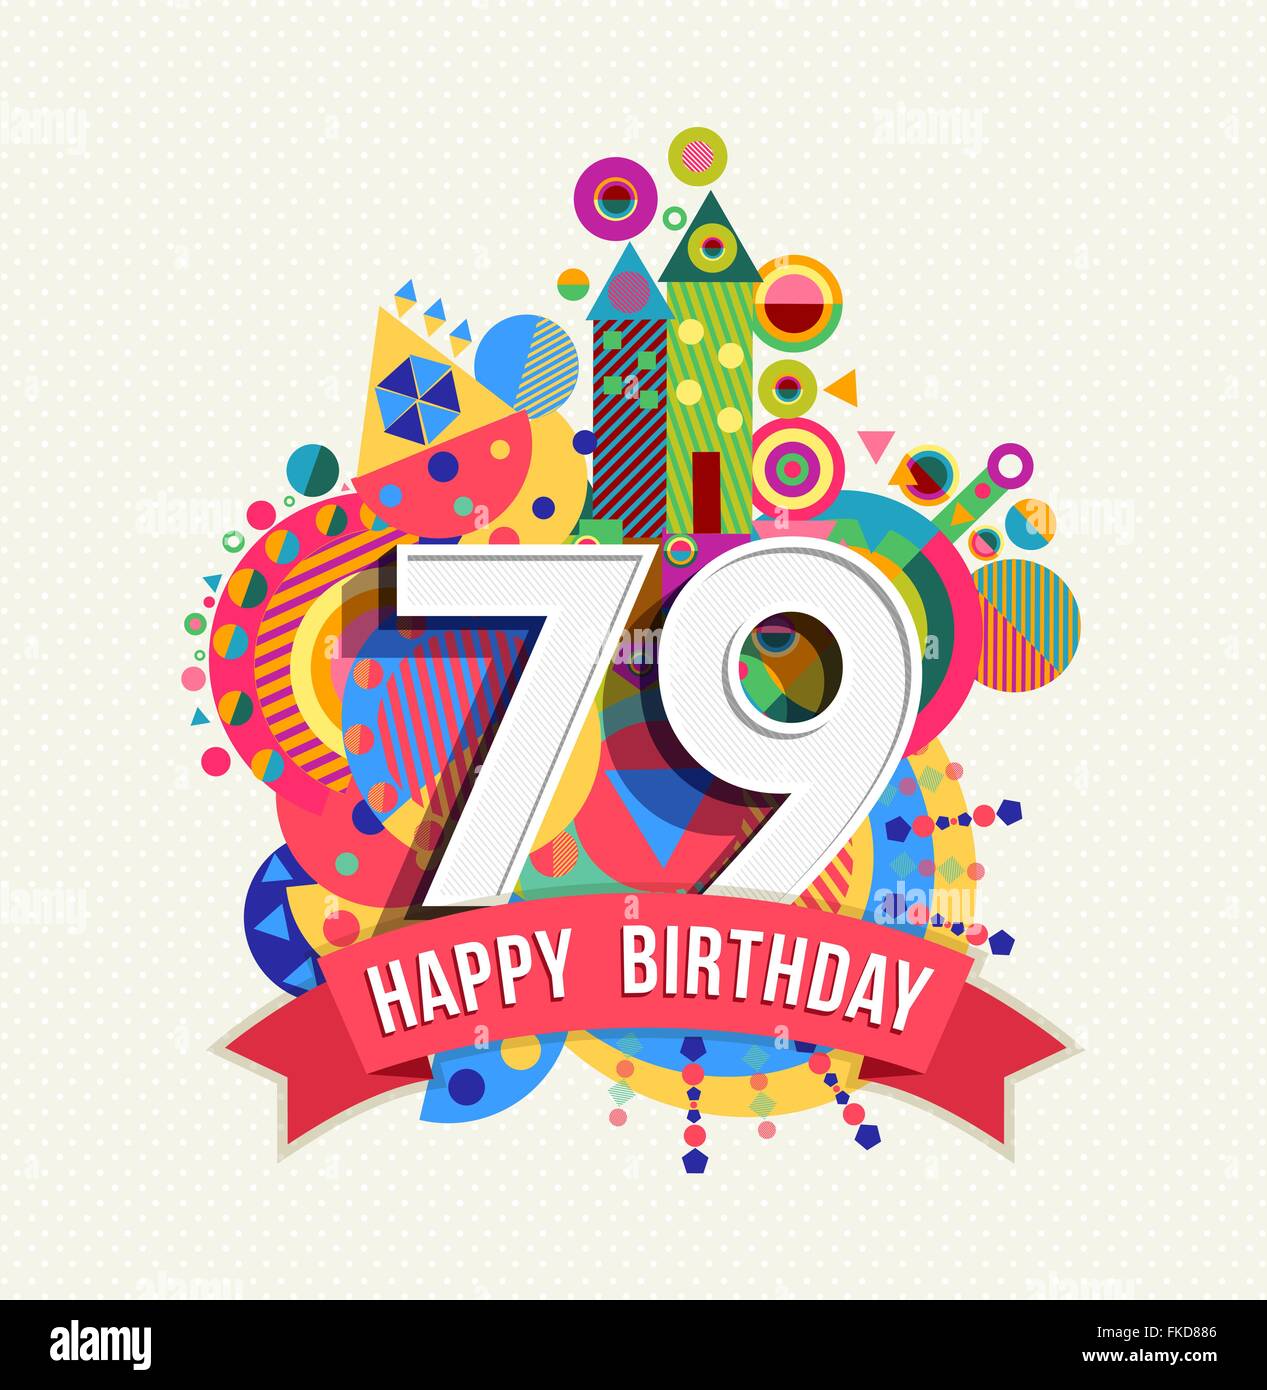 Happy Birthday seventy nine 79 year, fun celebration anniversary greeting card with number, text label and colorful geometry Stock Vector